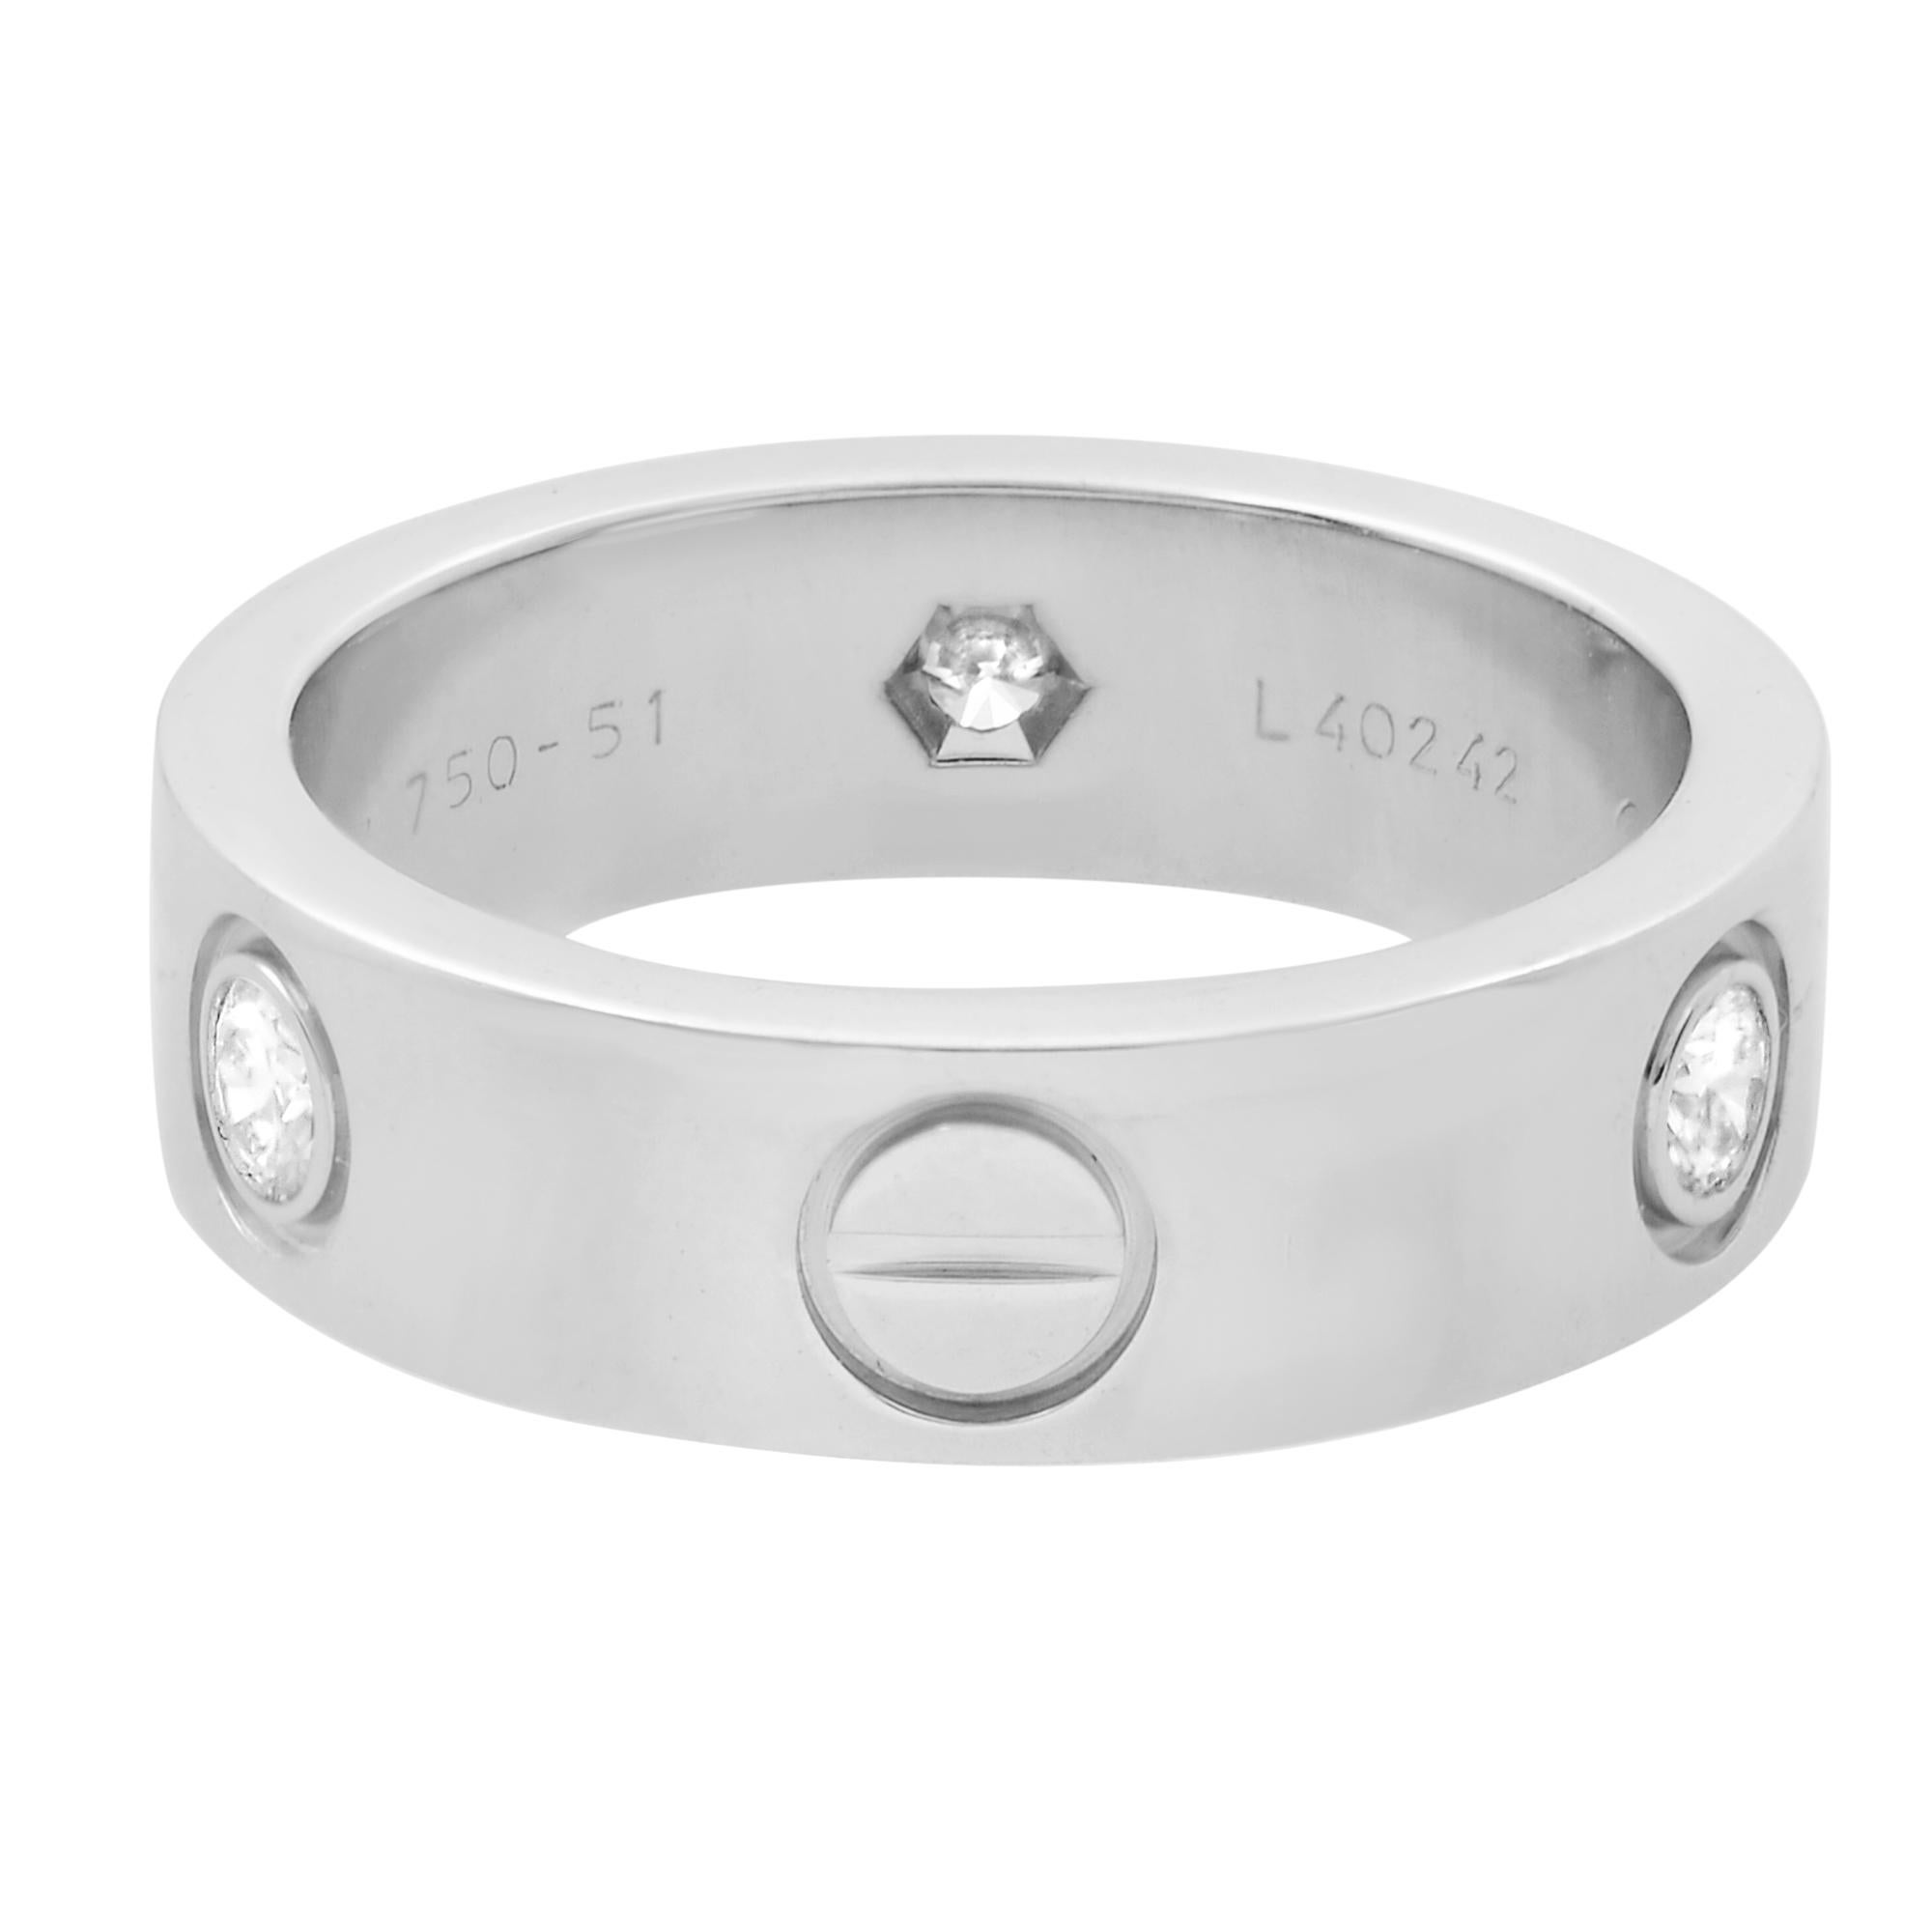 Cartier 3 diamonds Love ring crafted in 18k white gold. Set with 3 brilliant-cut round diamonds totaling 0.22 carats. Width: 5.5mm. Ring size 51 US 5.75. Excellent pre-owned condition. Comes with a box but without papers.